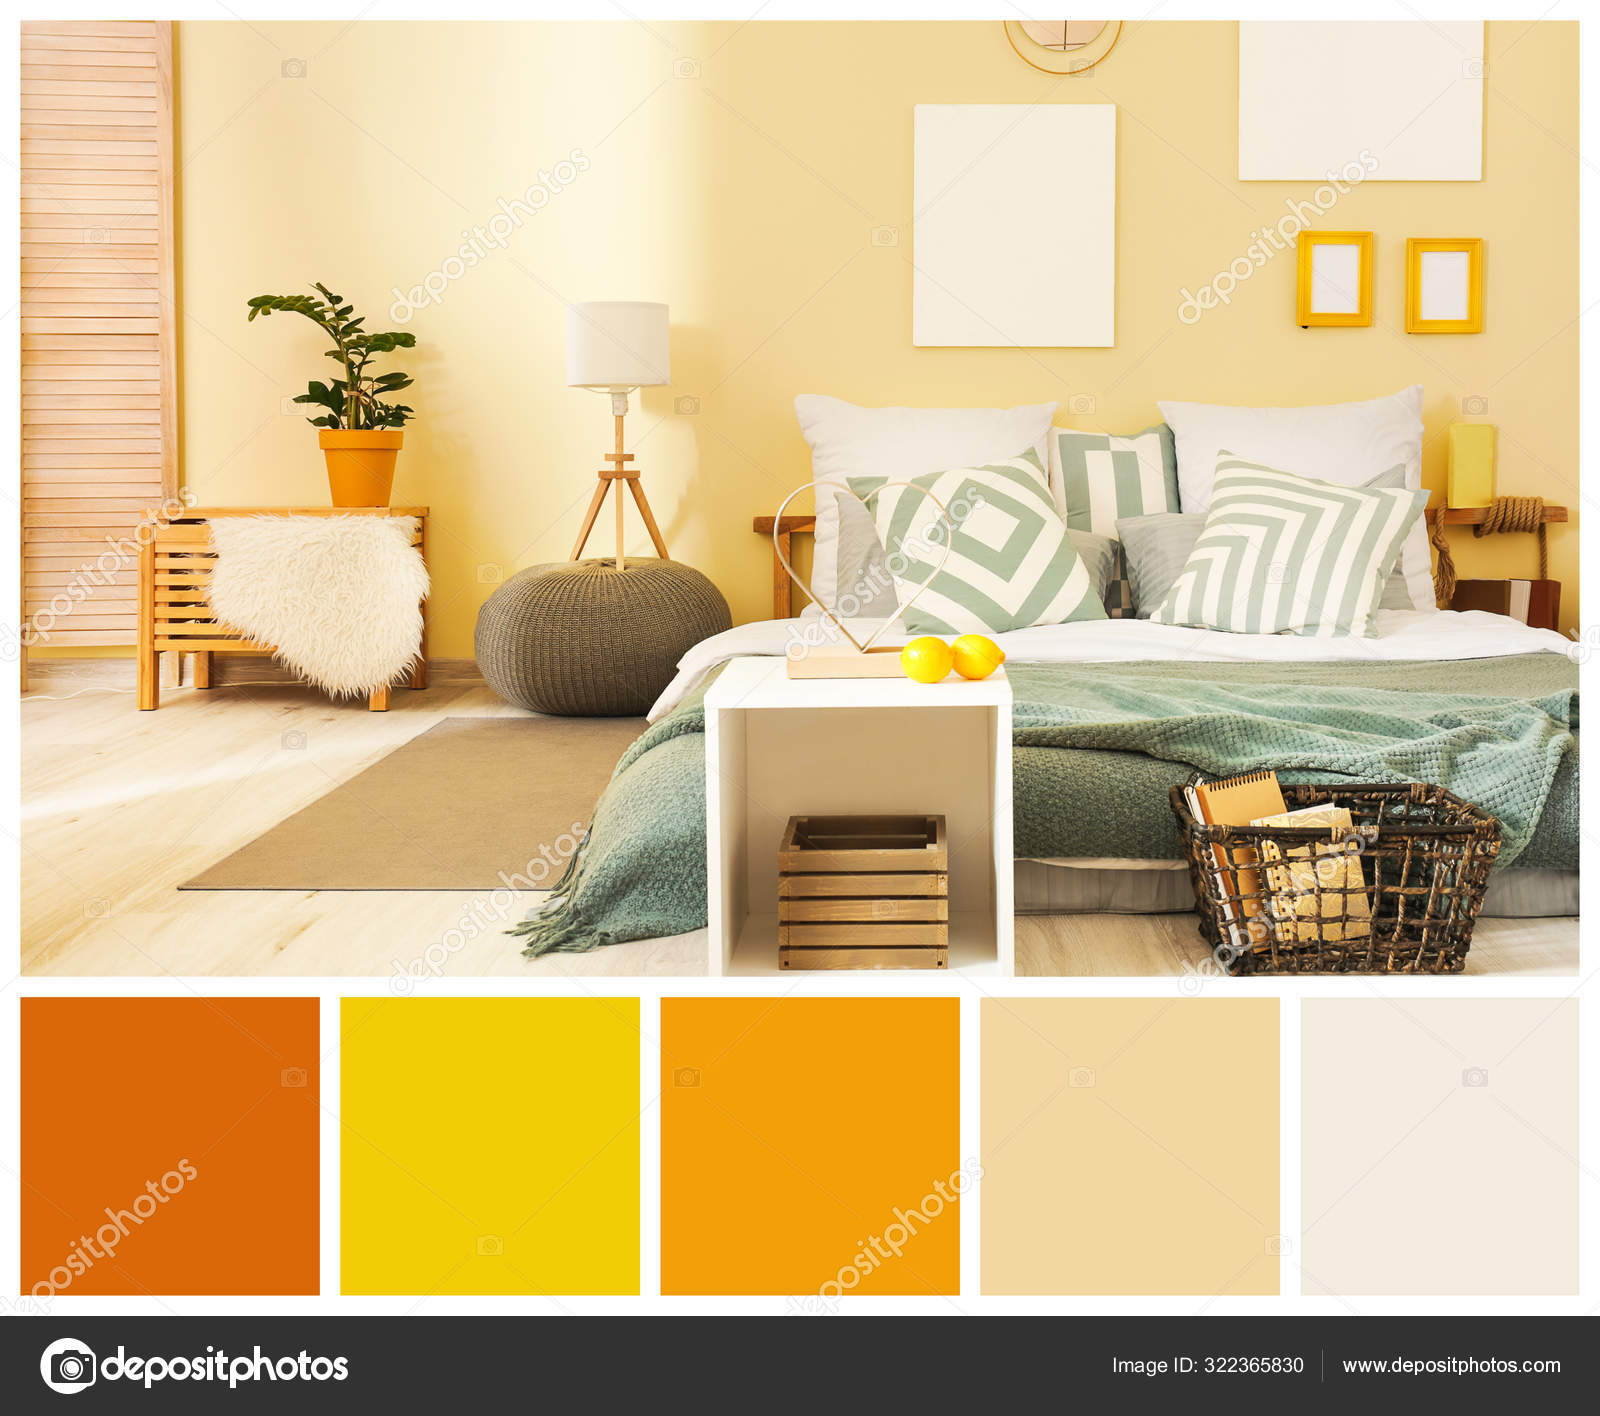 A bed in a bedroom in shades of yellow Stock Photos, Royalty Free A bed in  a bedroom in shades of yellow Images | Depositphotos